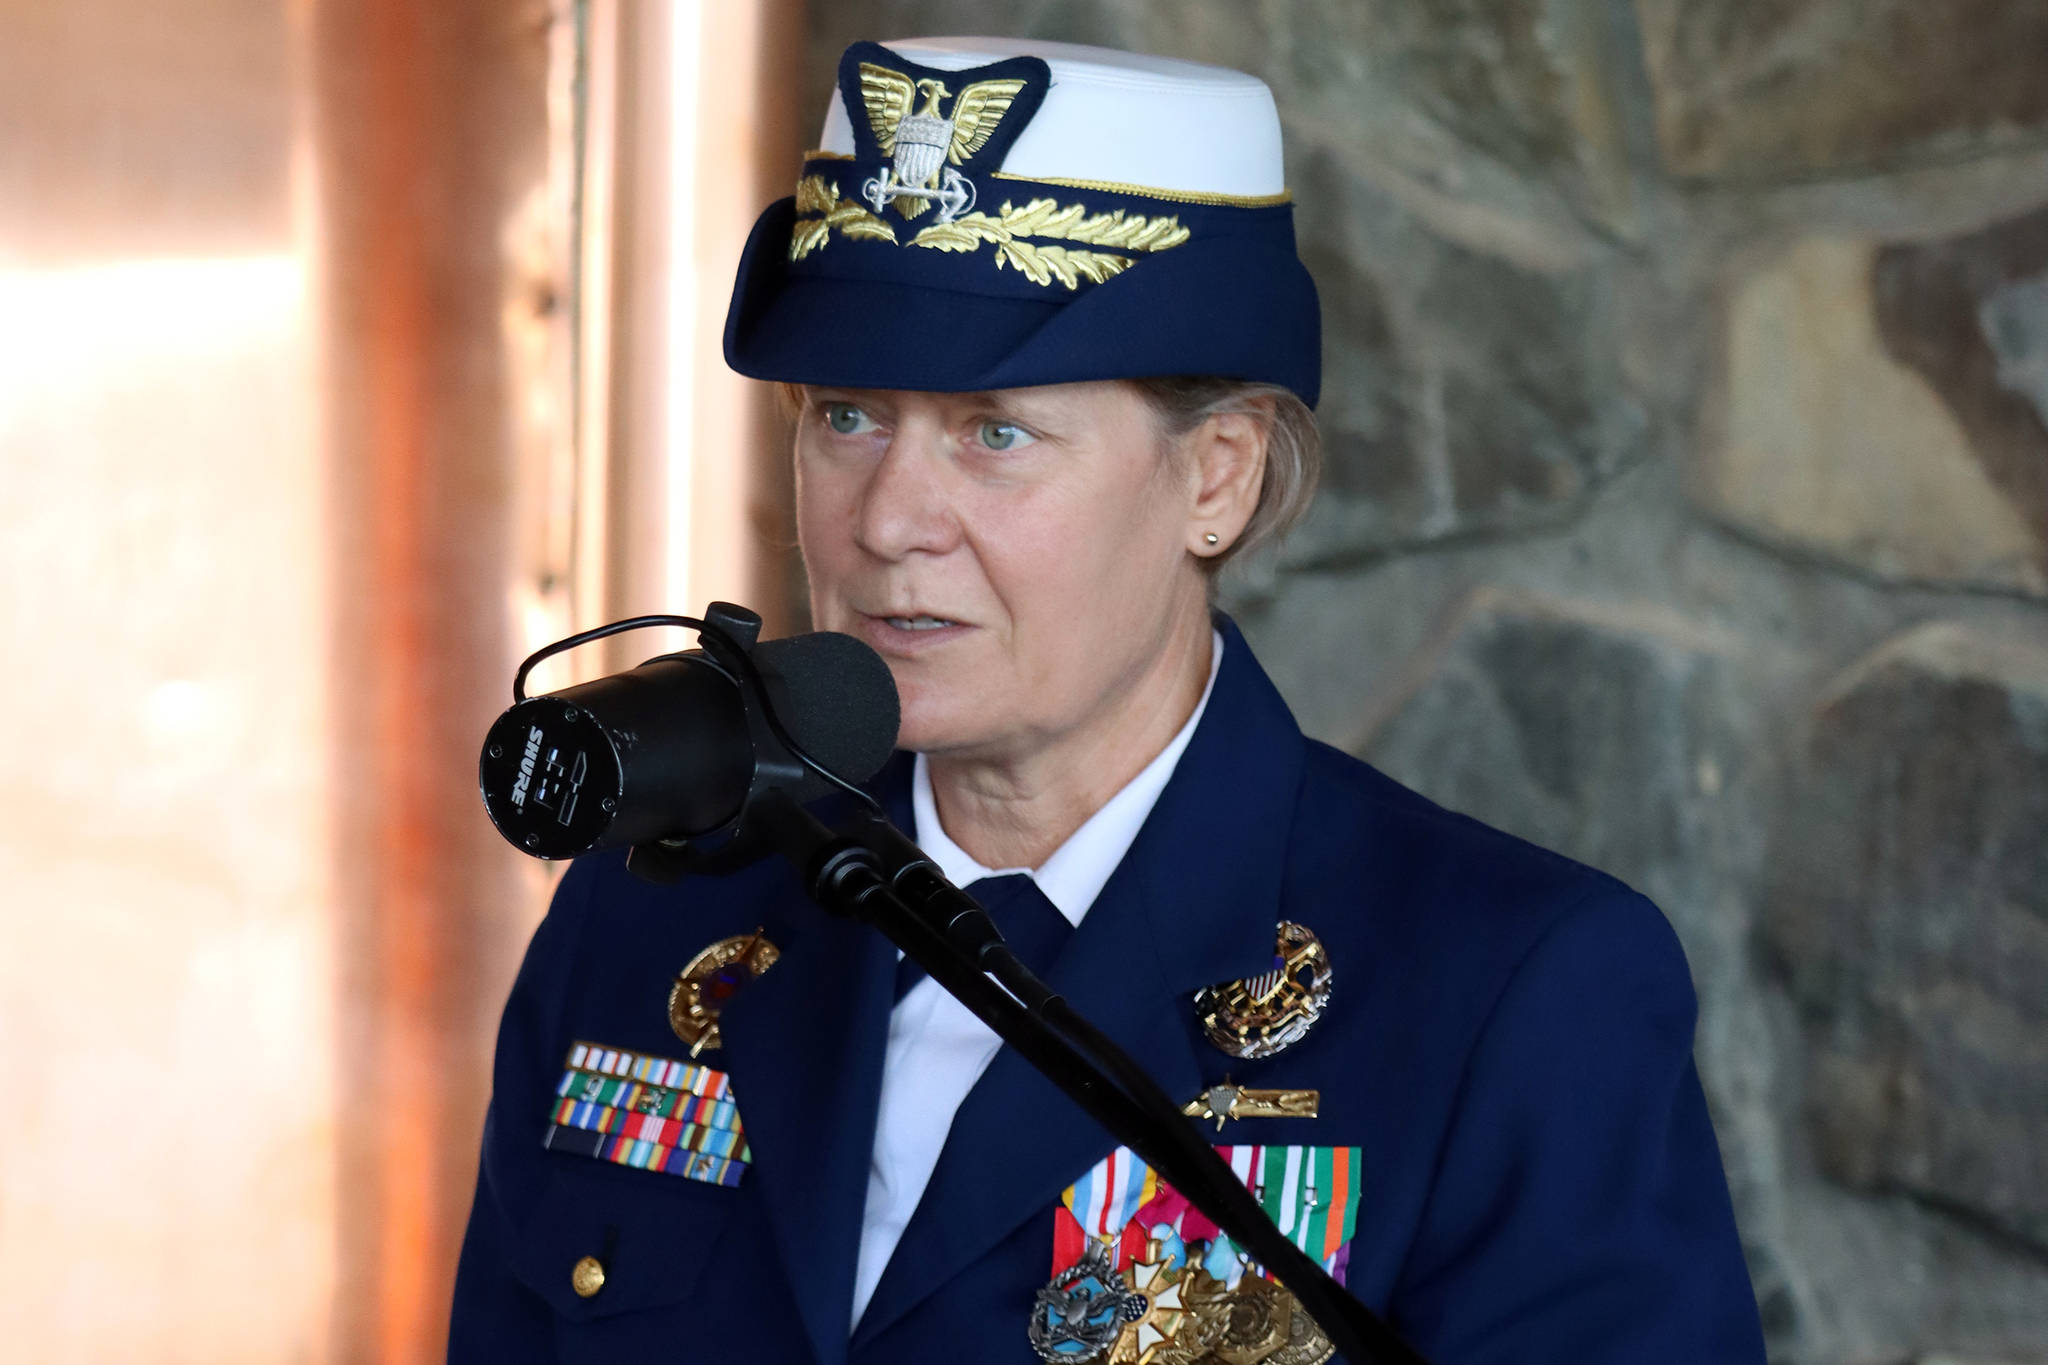 Then-Vice Adm. Linda Fagan, recently appointed as vice commandant of the U.S. Coast Guard, speaks during Coast Guard District 17 Change of Command ceremony on April 23, 2021. (Ben Hohenstatt / Juneau Empire File)